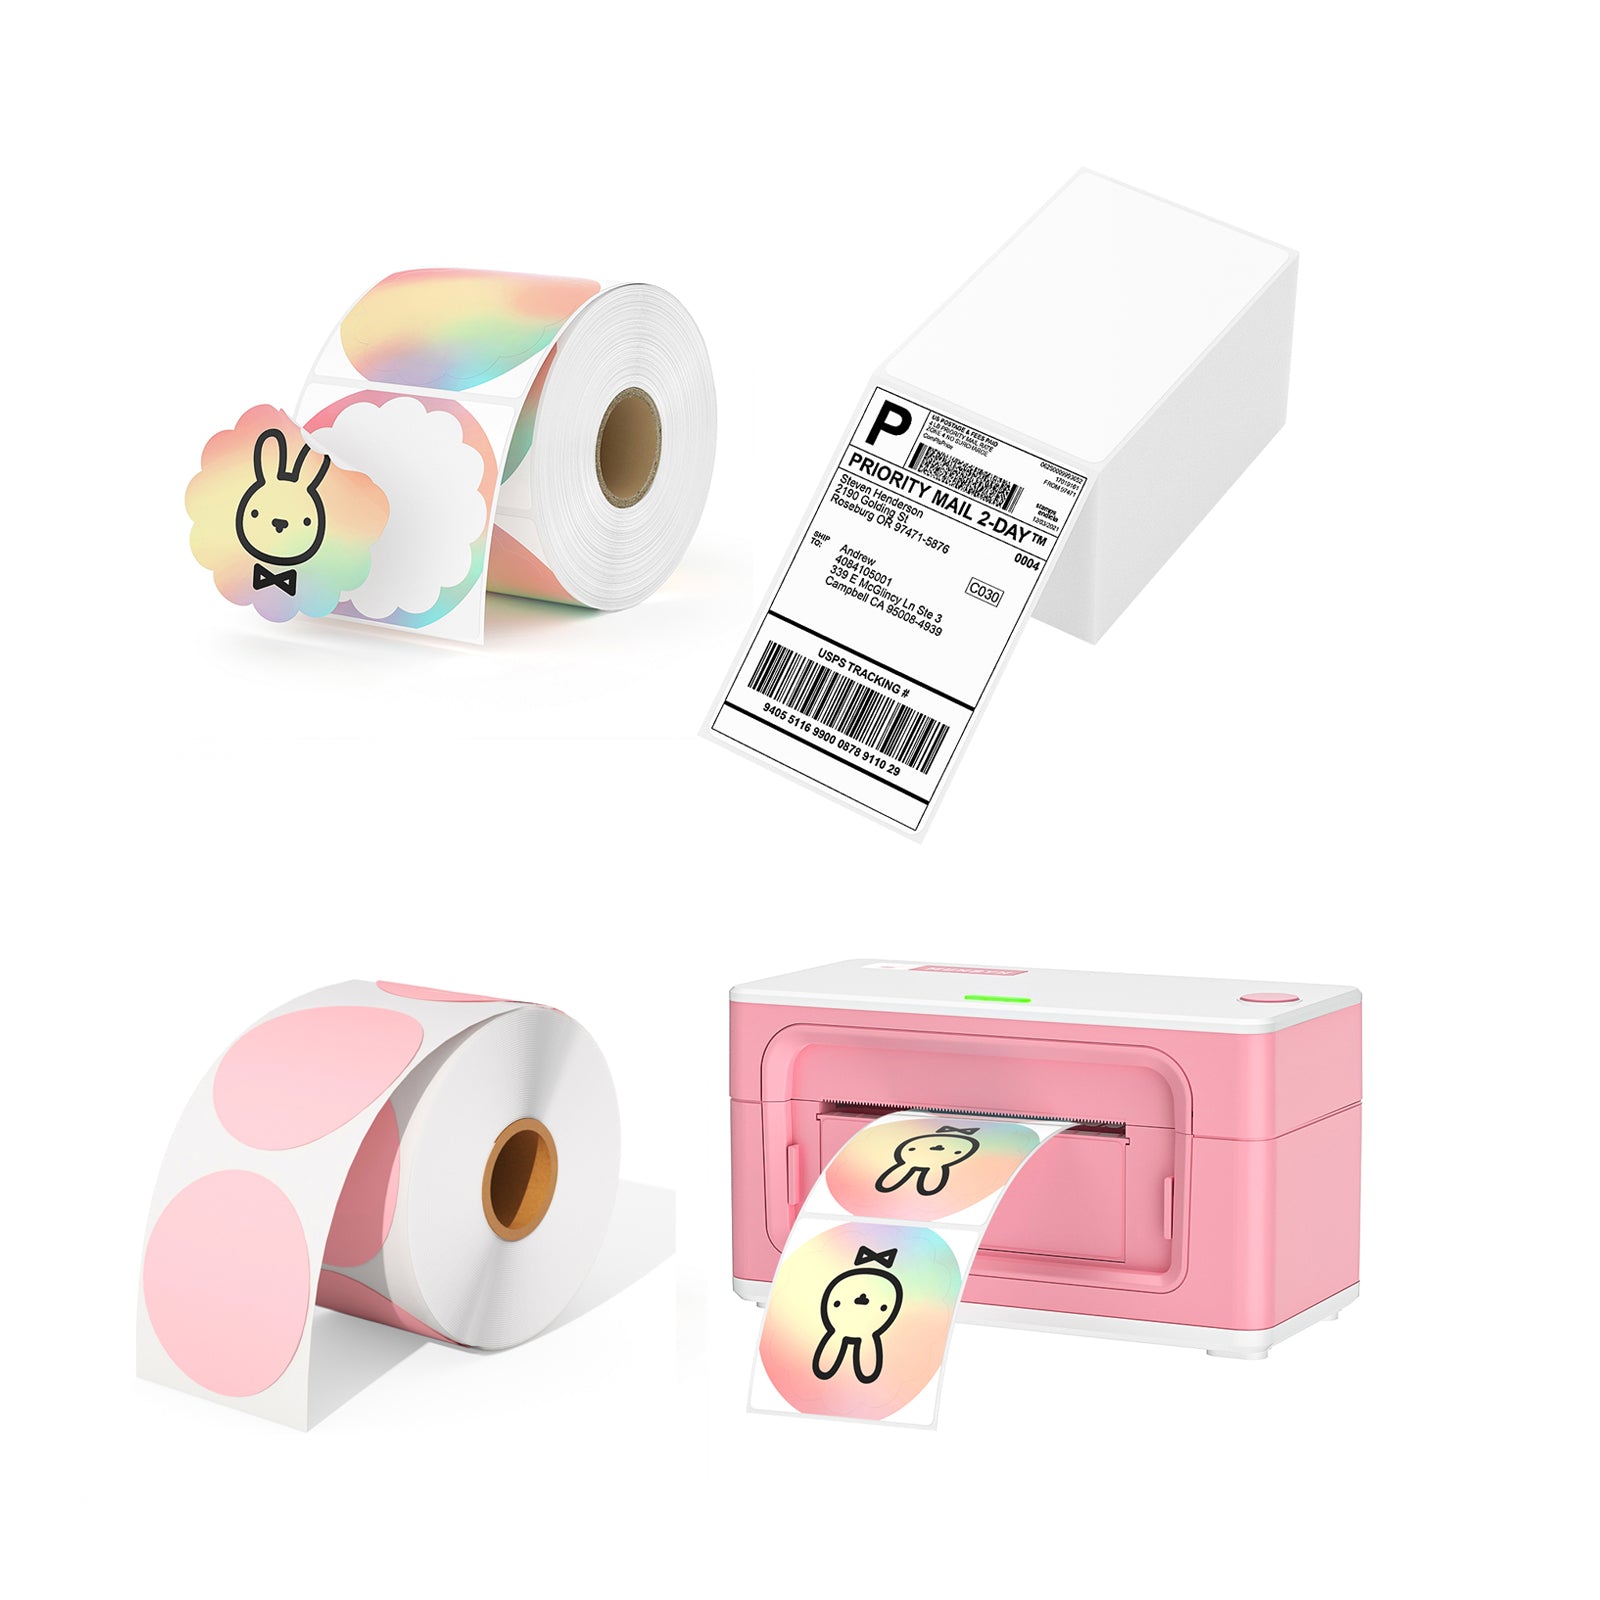 MUNBYN Pink Printer Color Label Kit includes a roll of color flower labels, a roll of pink round labels, a pink printer and a stack of blank shipping labels.